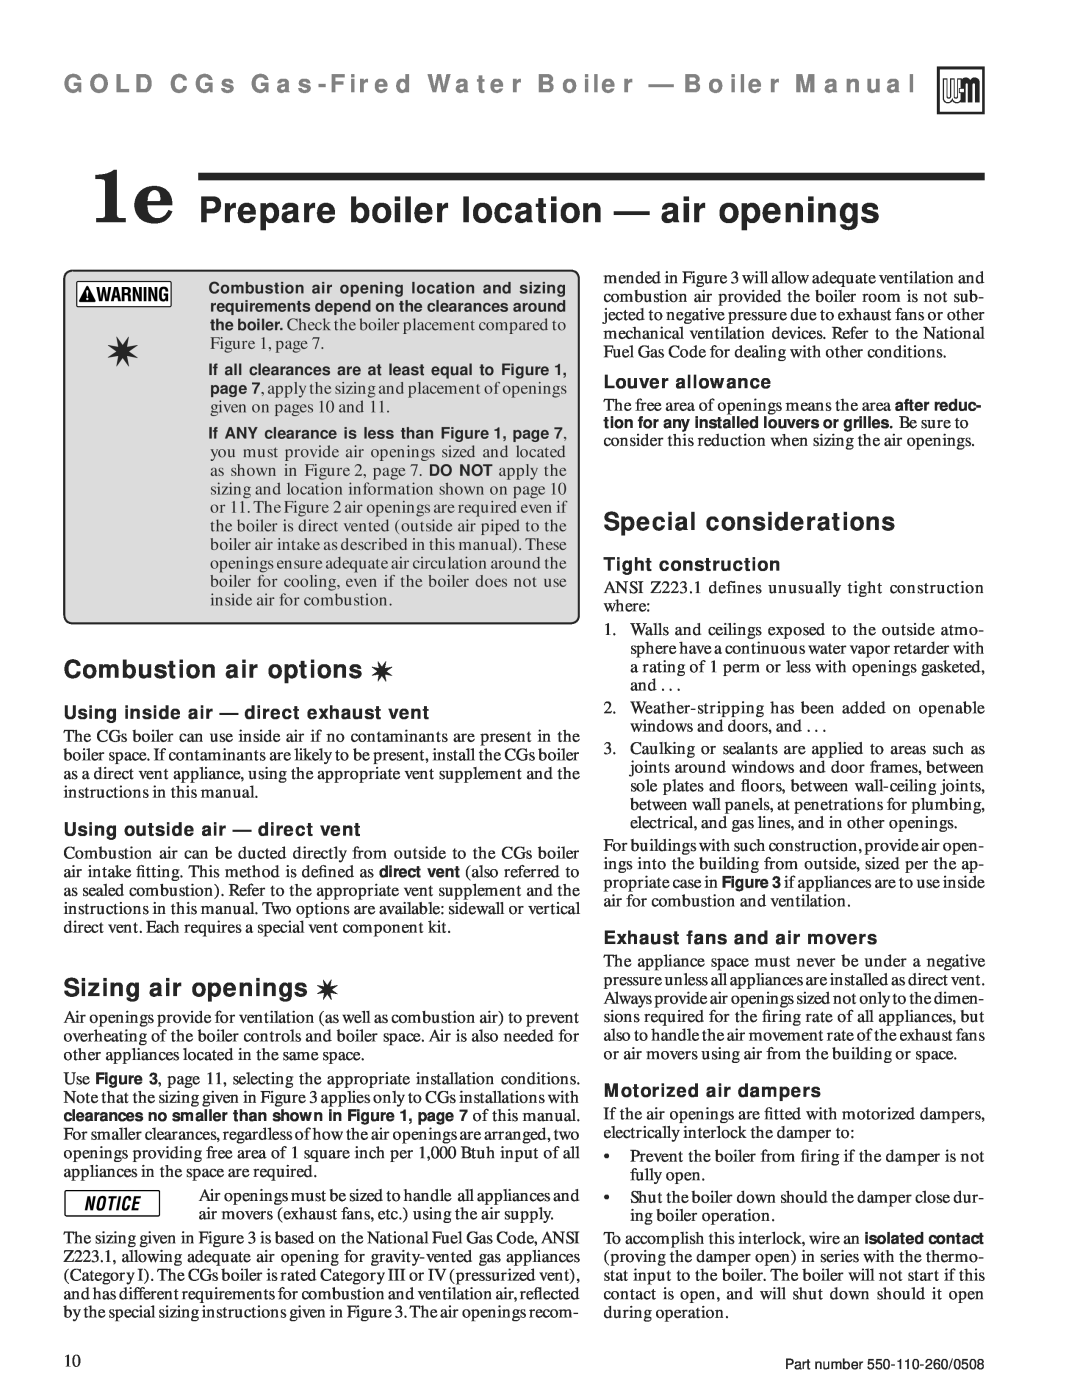 Weil-McLain 550-110-260/0508 manual 1e Prepare boiler location — air openings, Combustion air options, Sizing air openings 